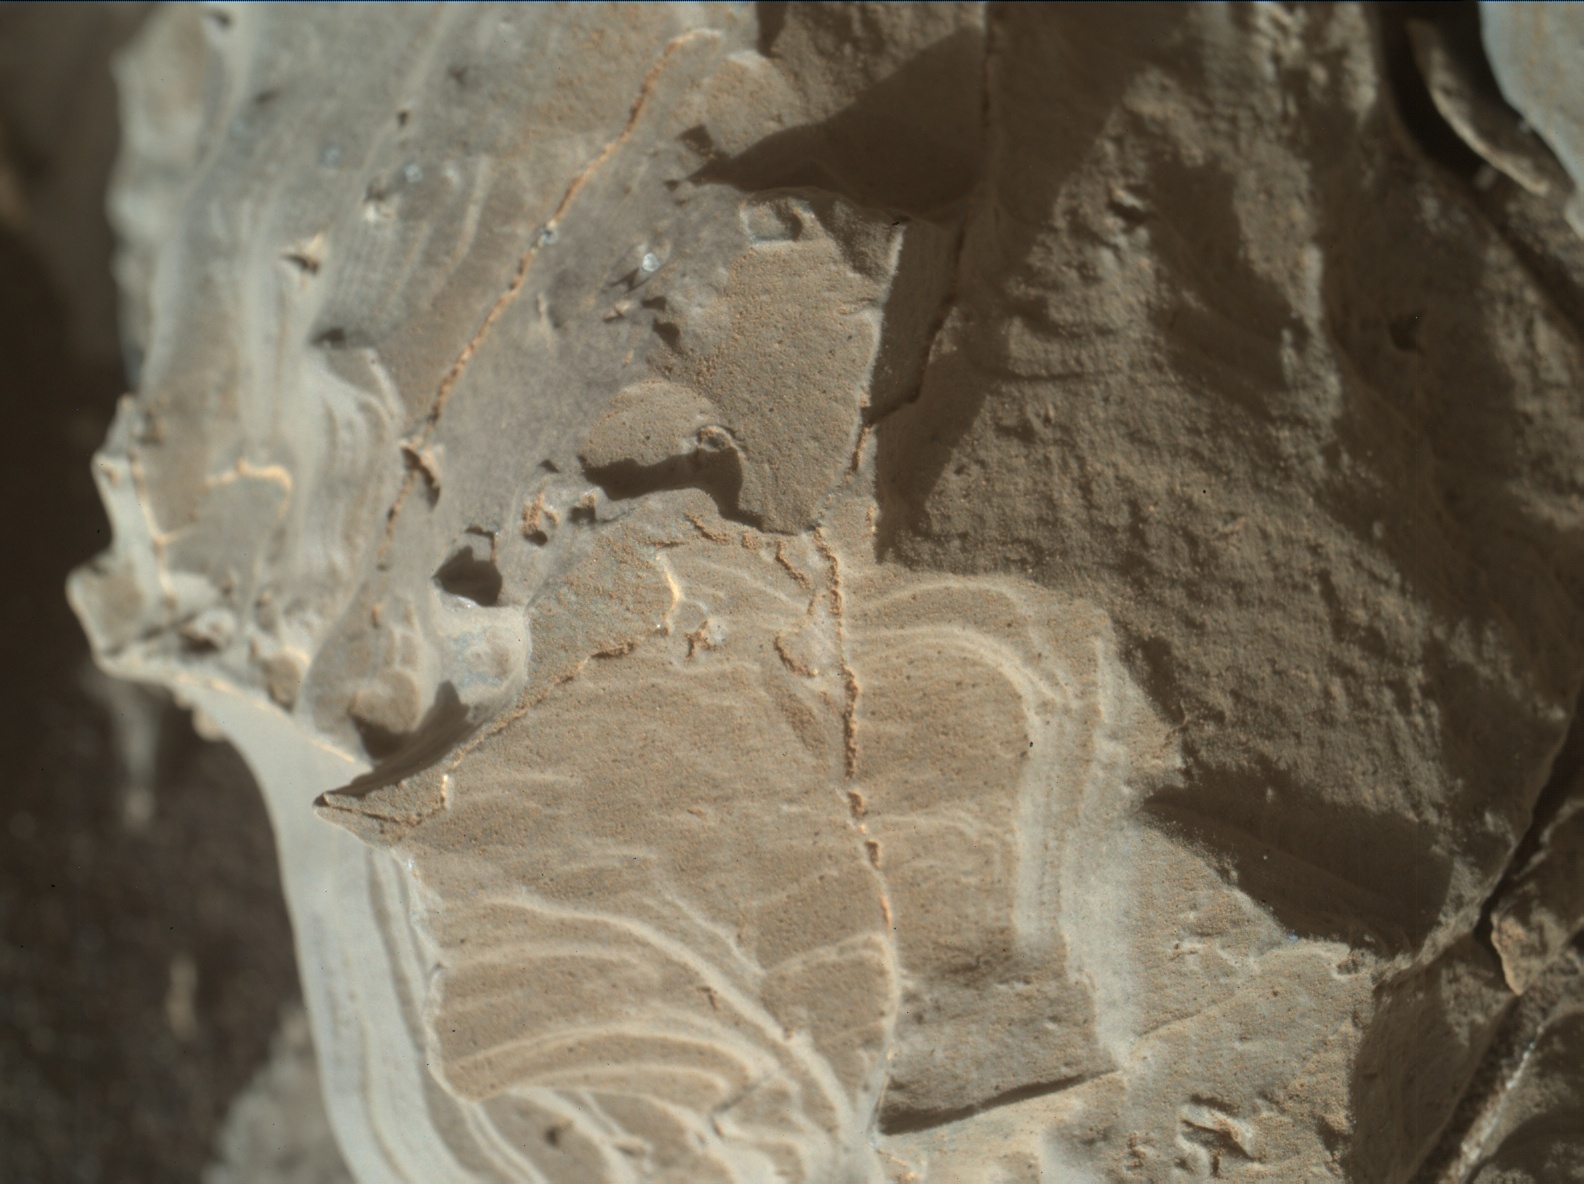 Nasa's Mars rover Curiosity acquired this image using its Mars Hand Lens Imager (MAHLI) on Sol 1938